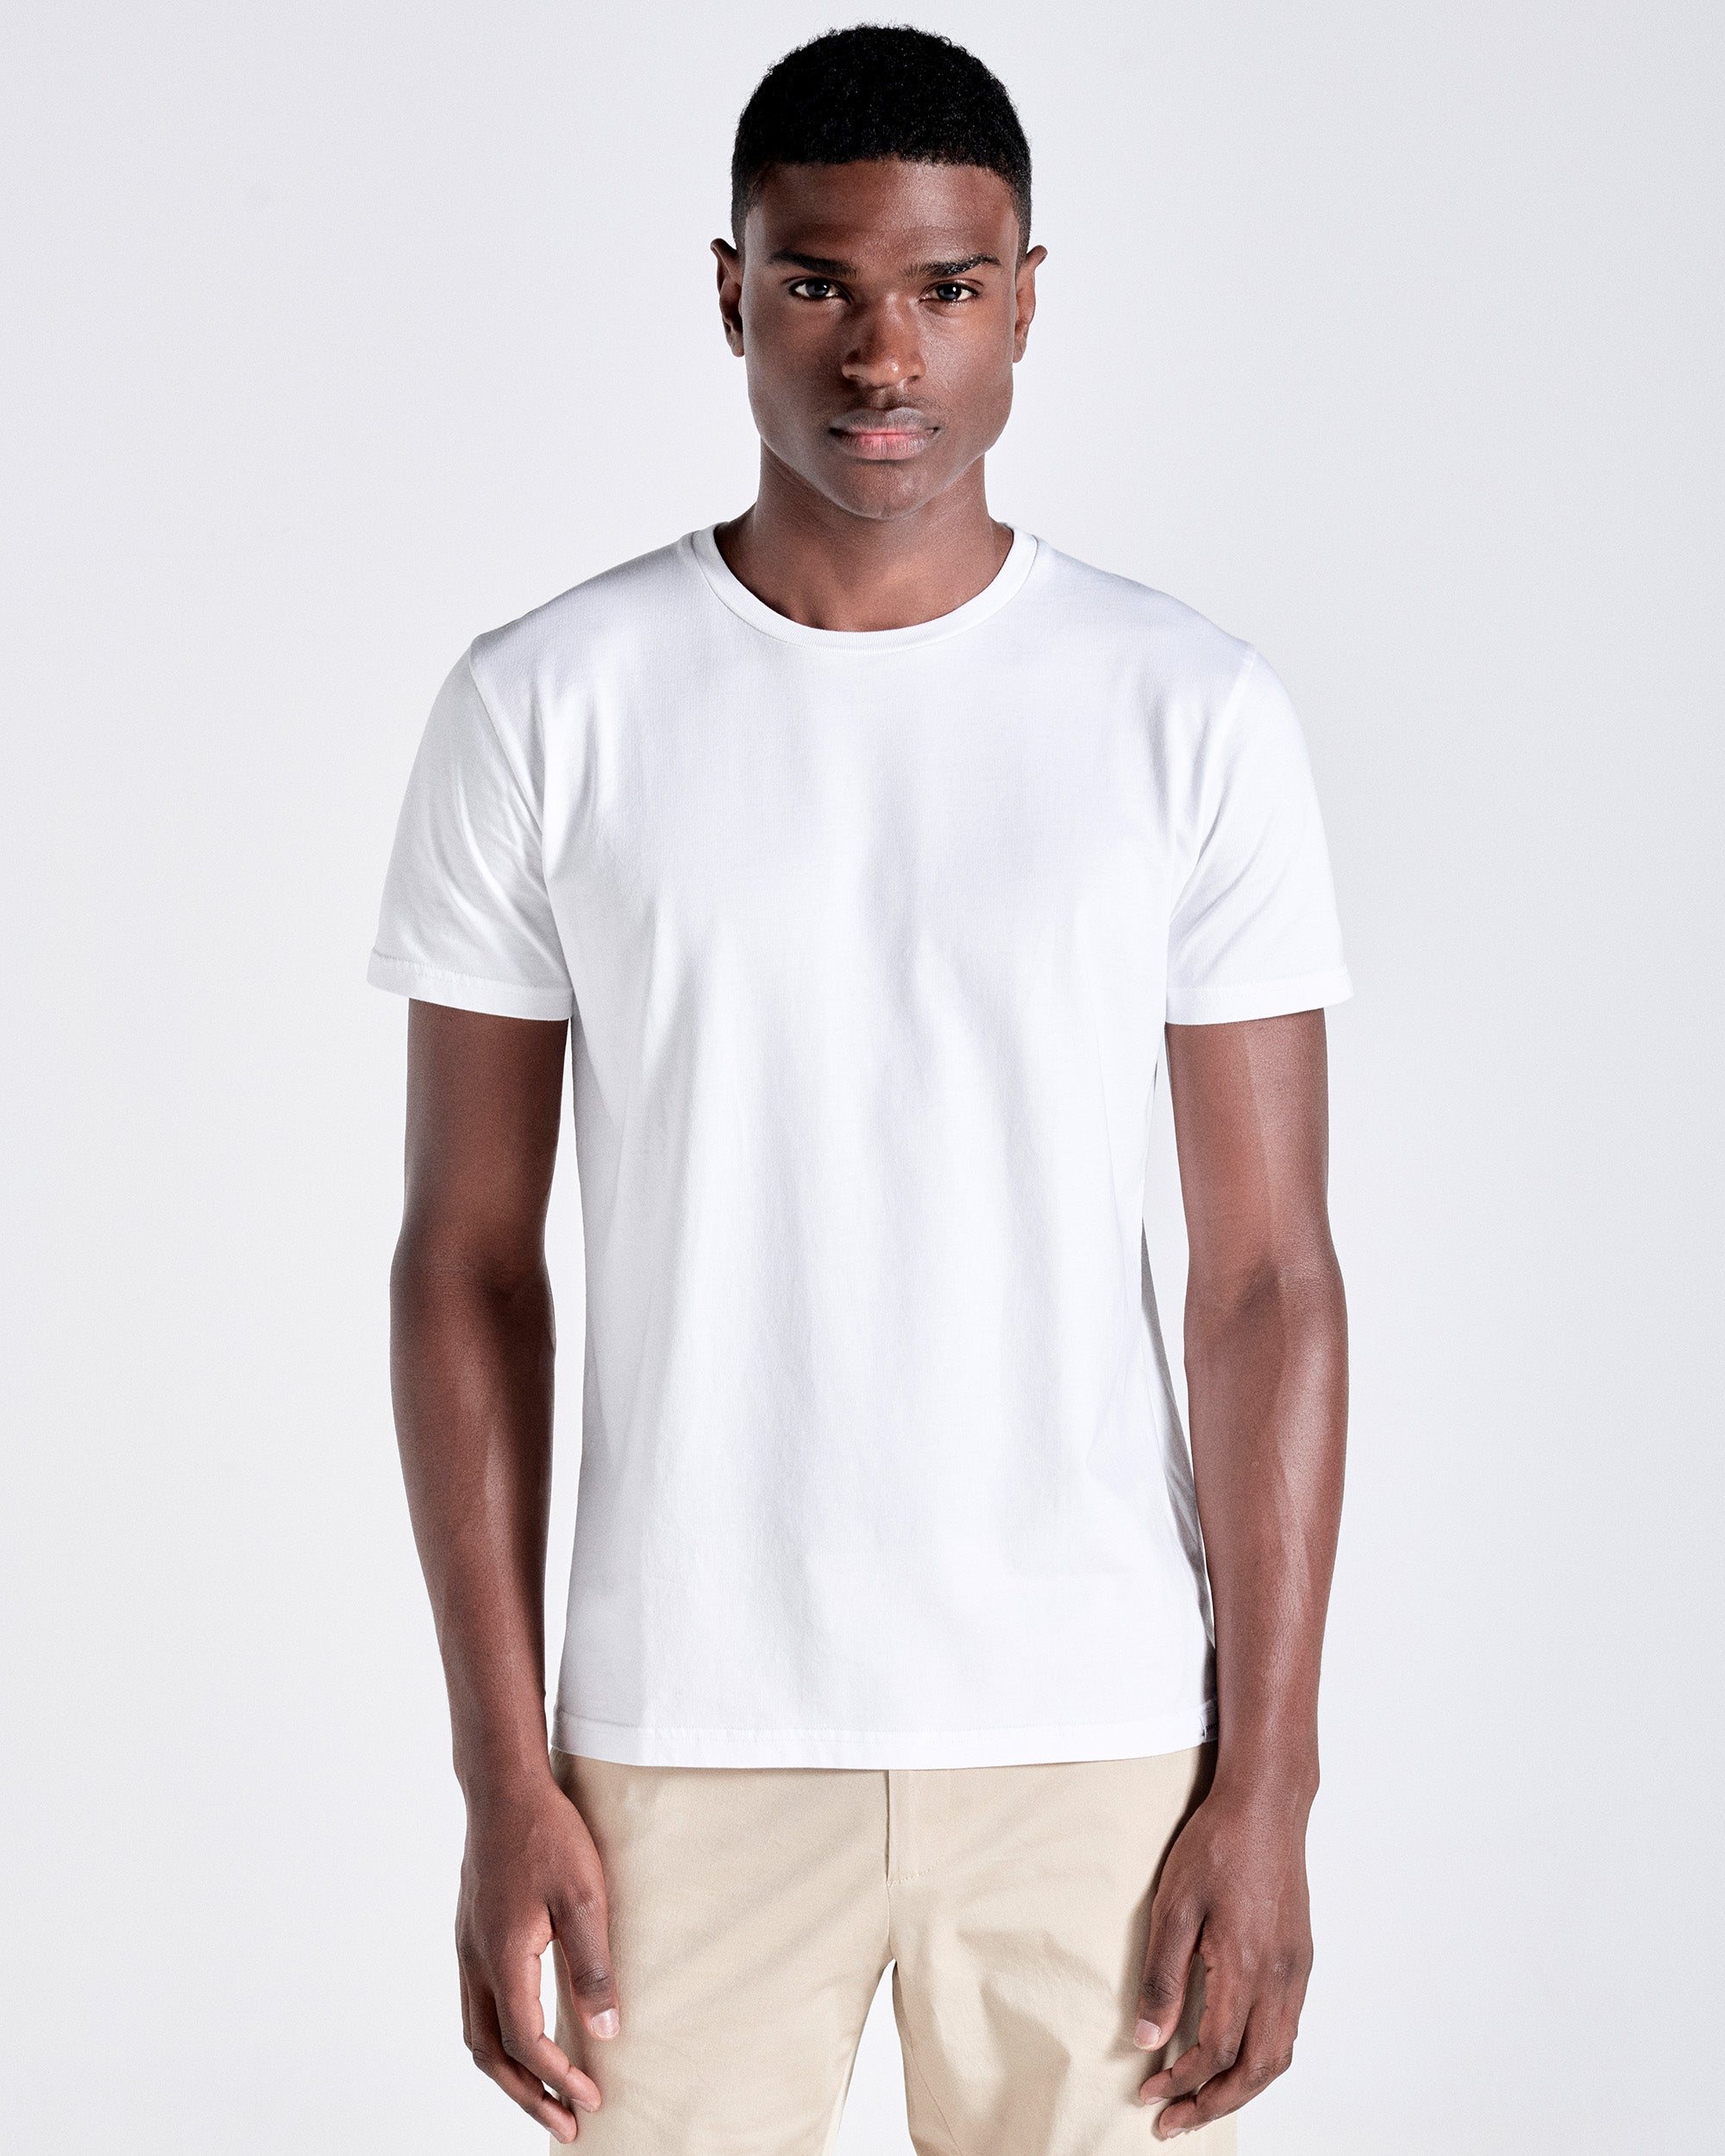 hjul kam Ælte The Perfect T-Shirt | High-quality Cotton Tee for Men